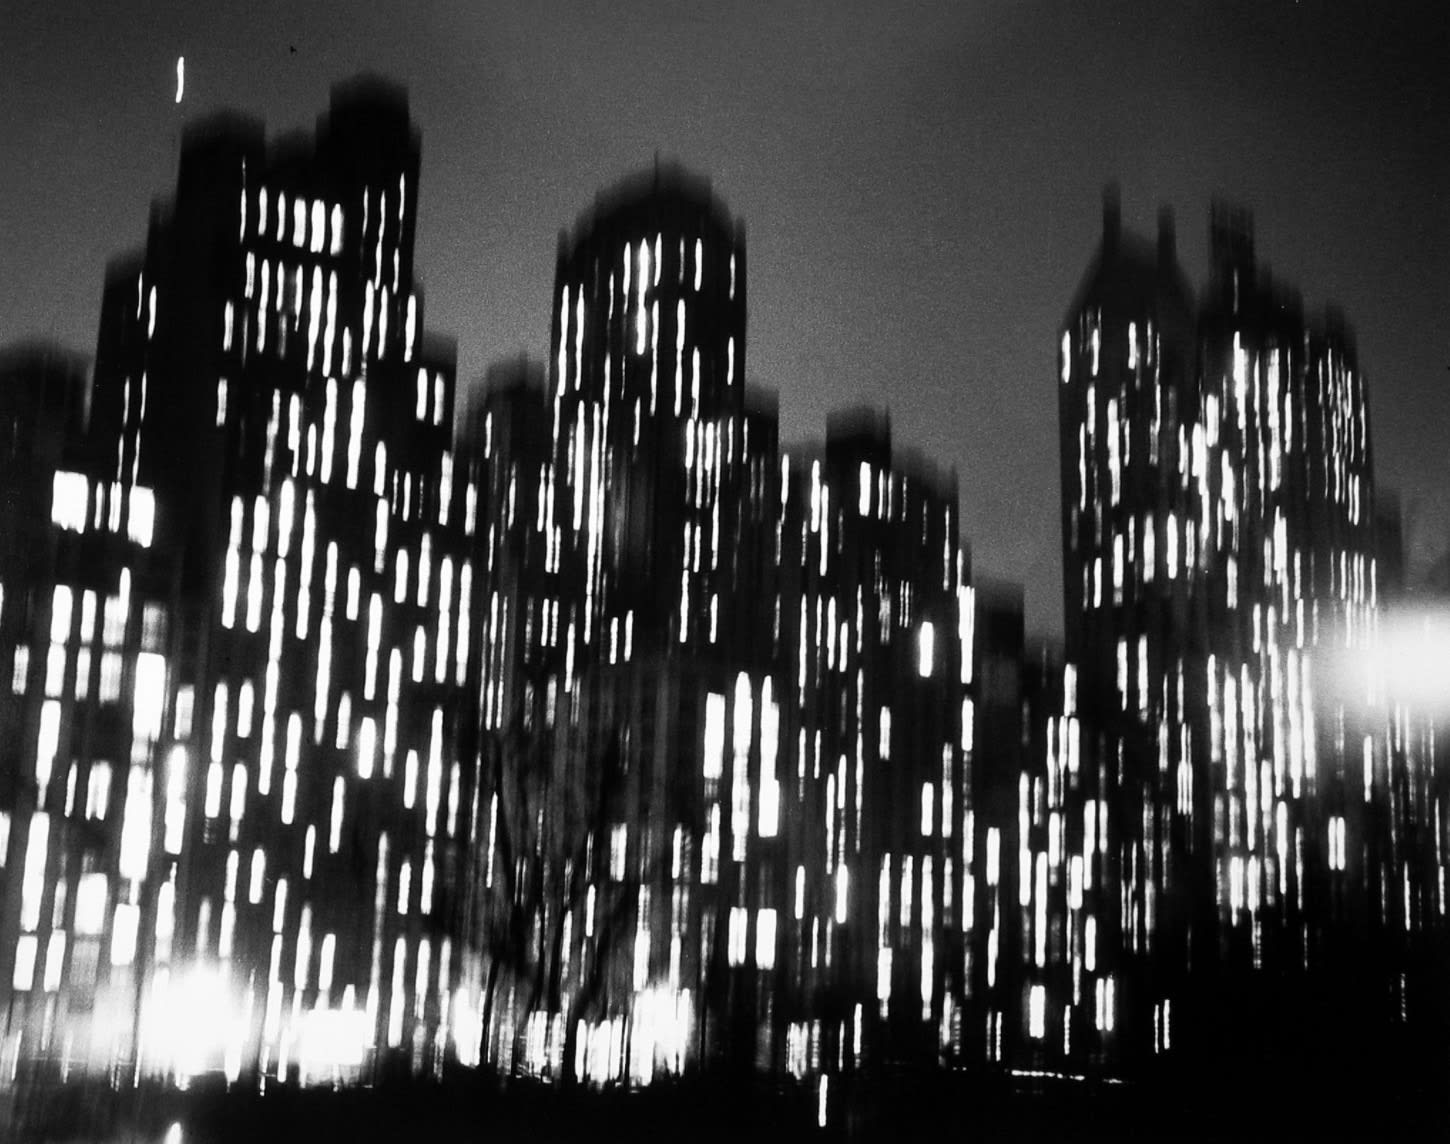 Ted Croner, Central Park South, 1947